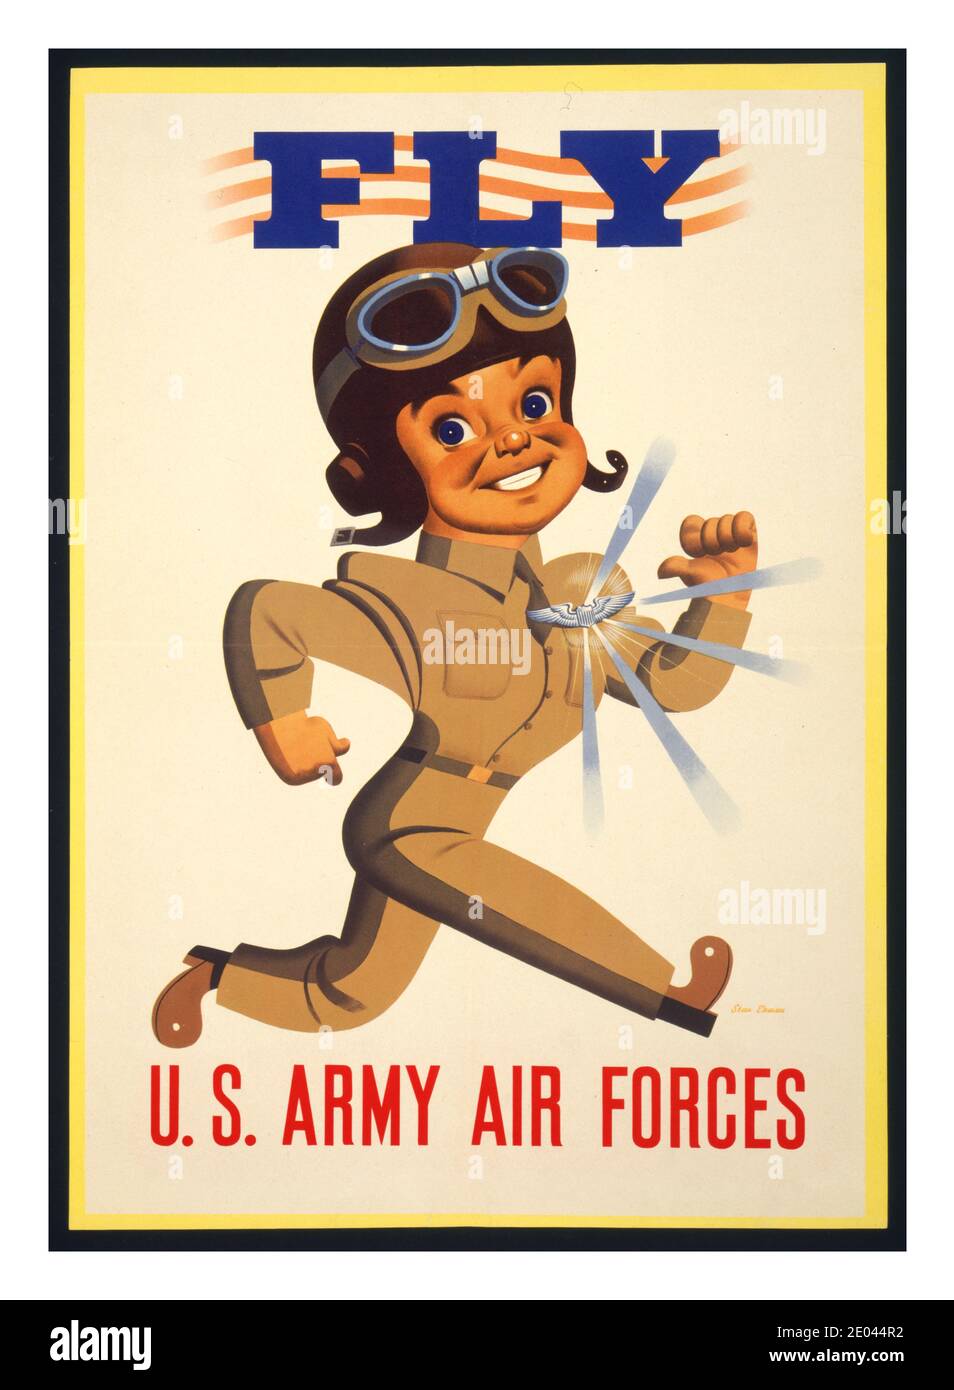 FLY RECRUITMENT WW2 1940’s Vintage propaganda Poster: “Fly - U.S. Army Air Forces” / by Stan Ekman. Date Created/Published: [ca. 1942] World War II  (poster) : lithograph, color Poster showing a pilot wearing shining wings on his chest. Recruitment poster for US Army Air Forces Stock Photo